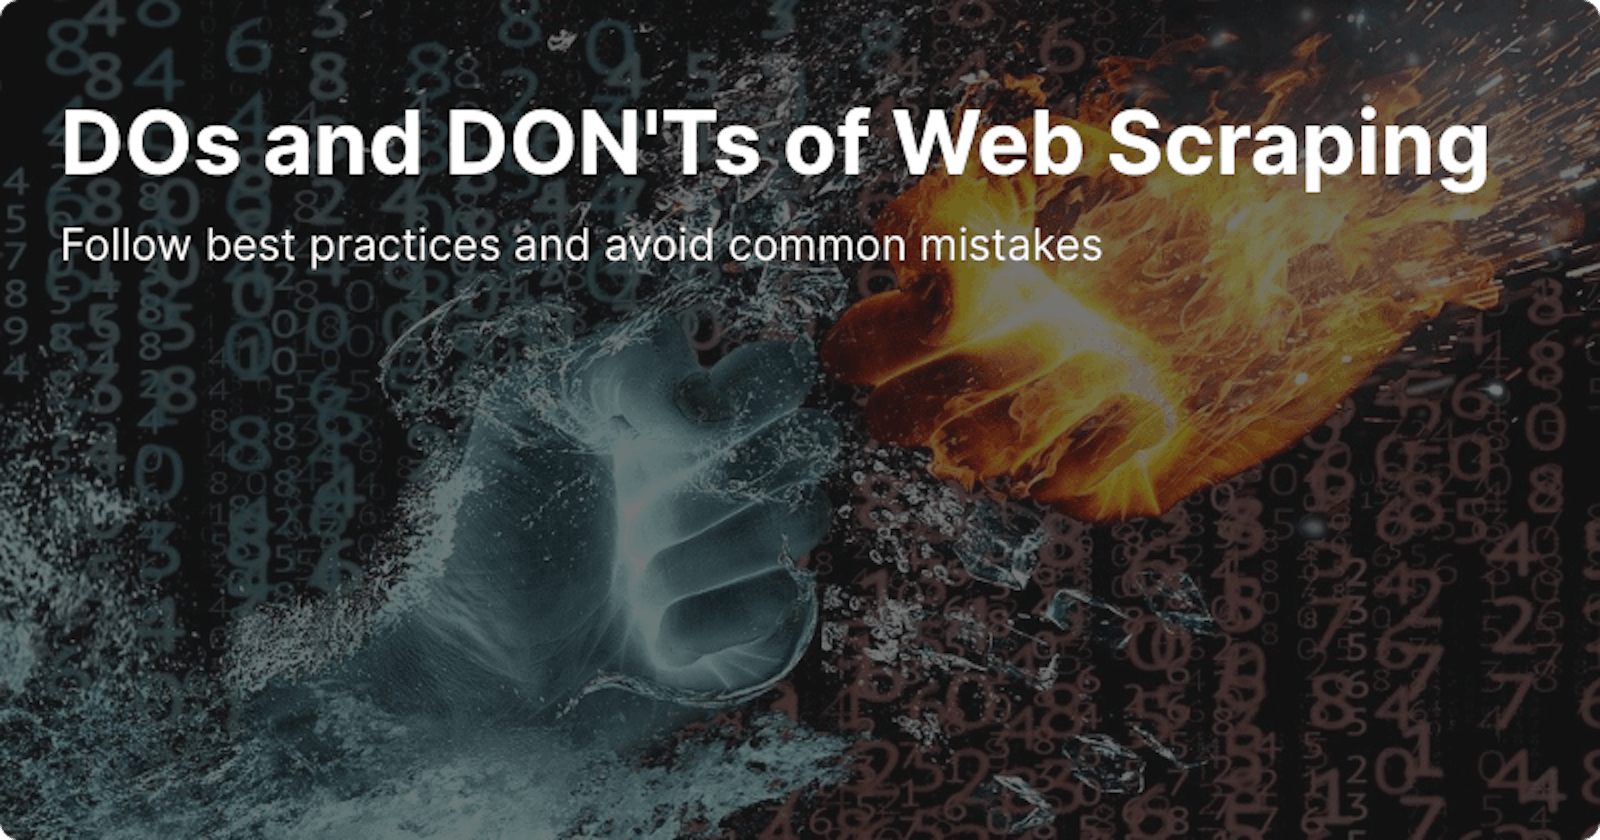 DOs and DON'Ts of Web Scraping